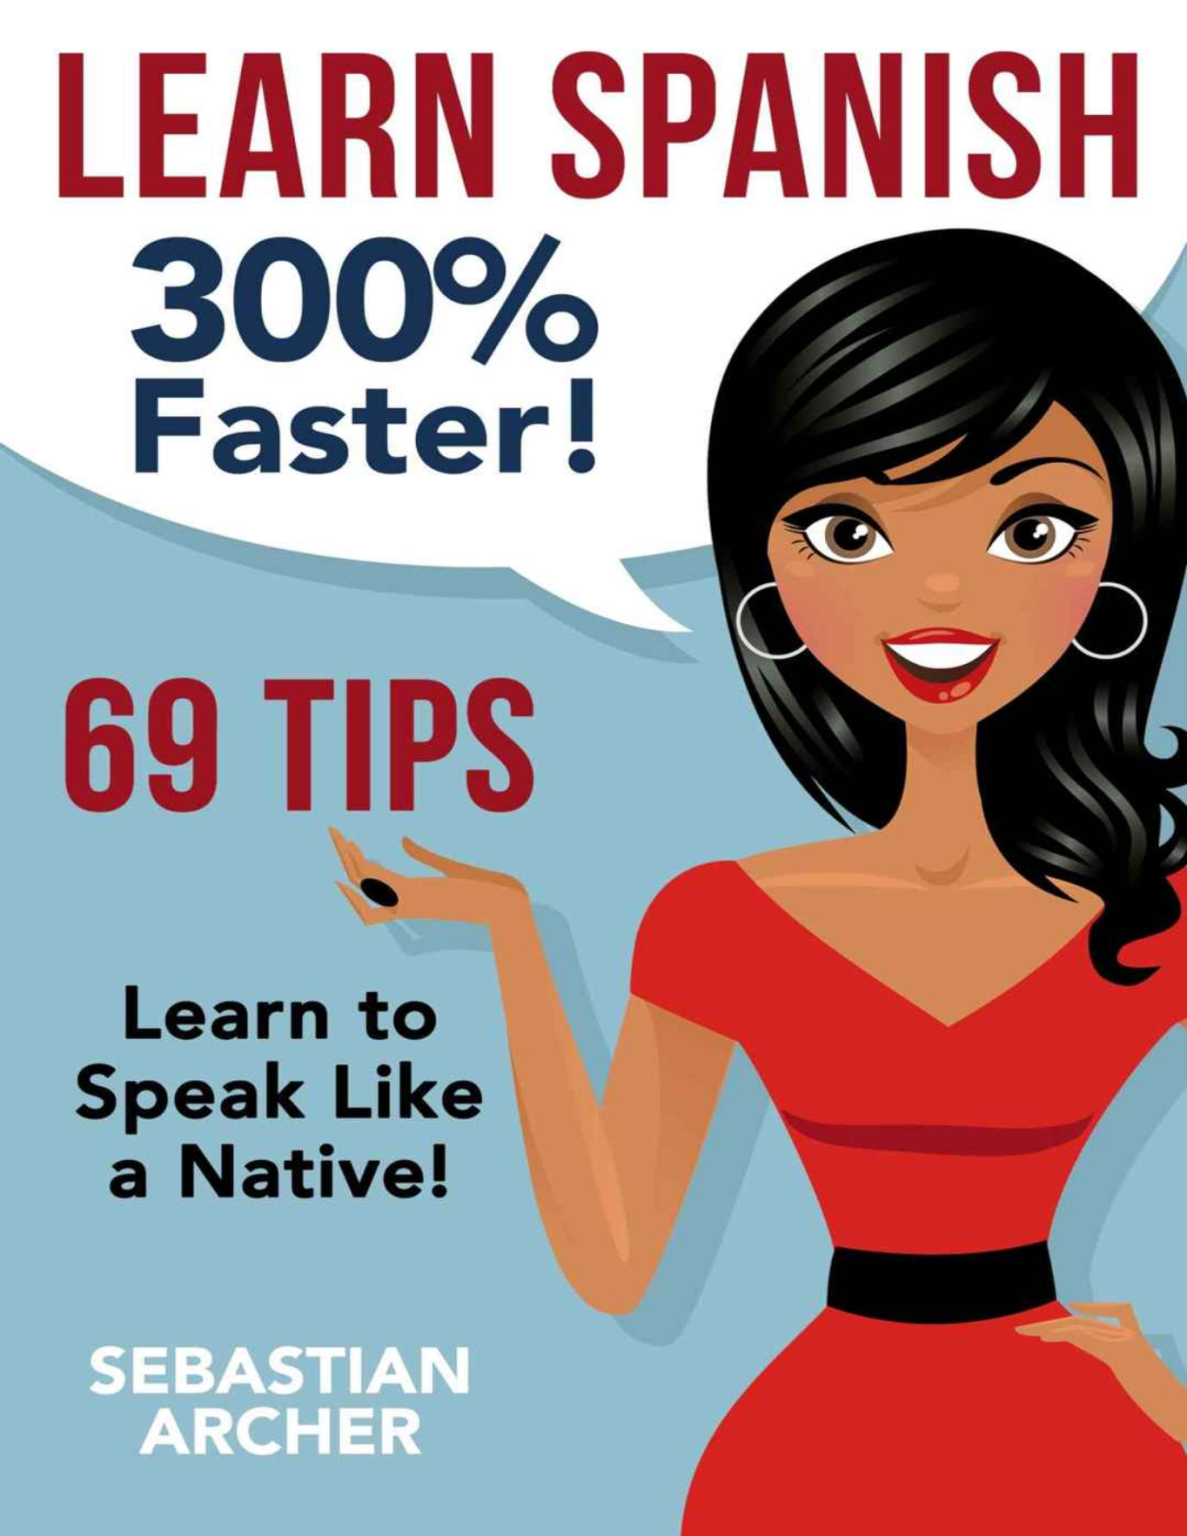 Rich results on Google's SERP when searching for ''Learn-Spanish-300-Faster-69-Tips''